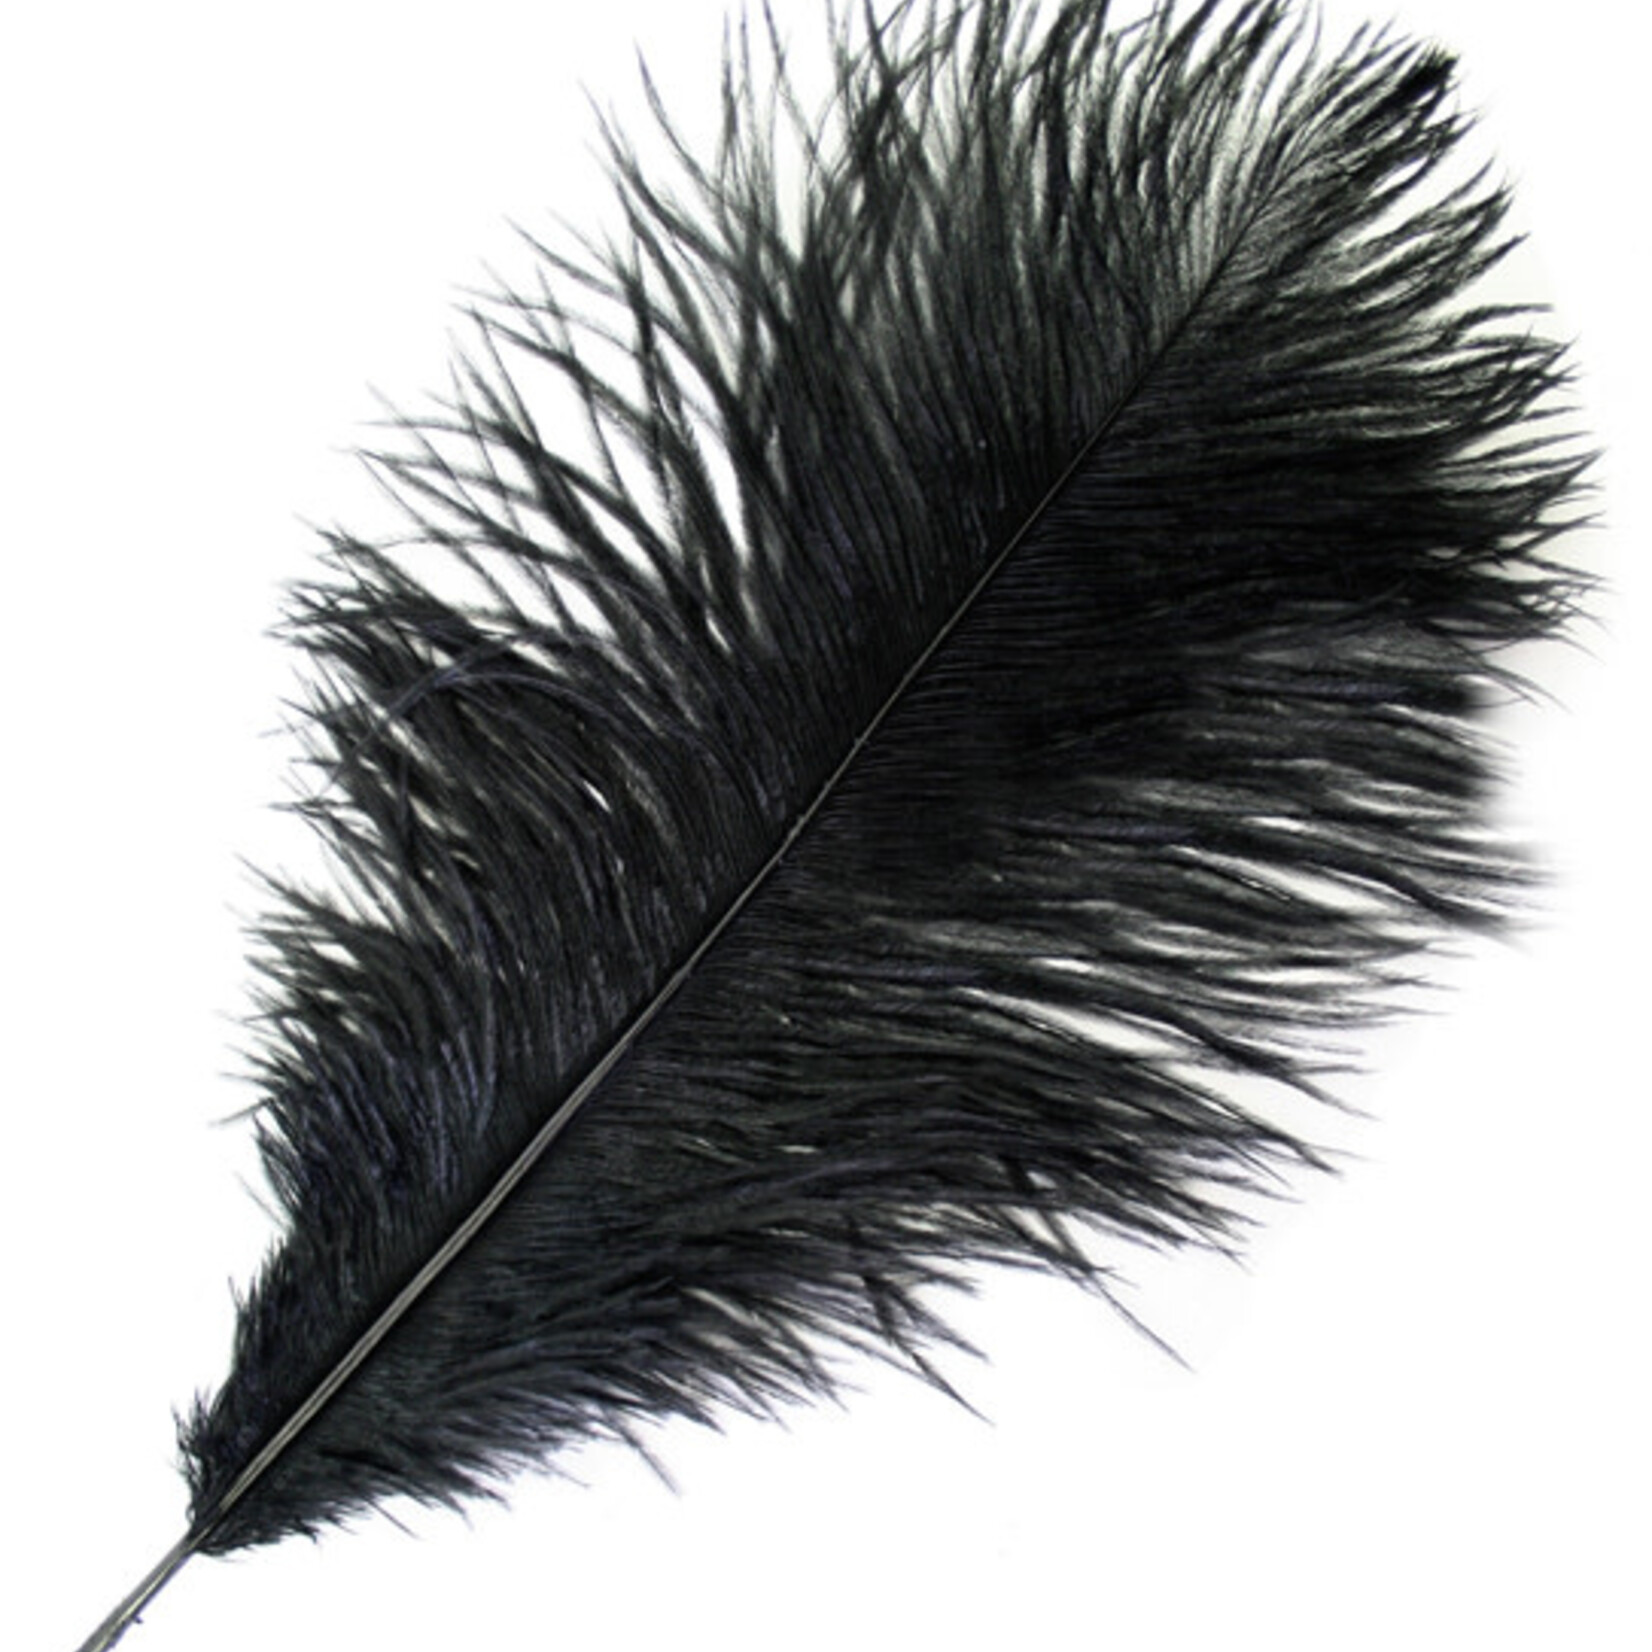 Ostrich Drab Plumes 6-8 Inch (12 pieces) Black